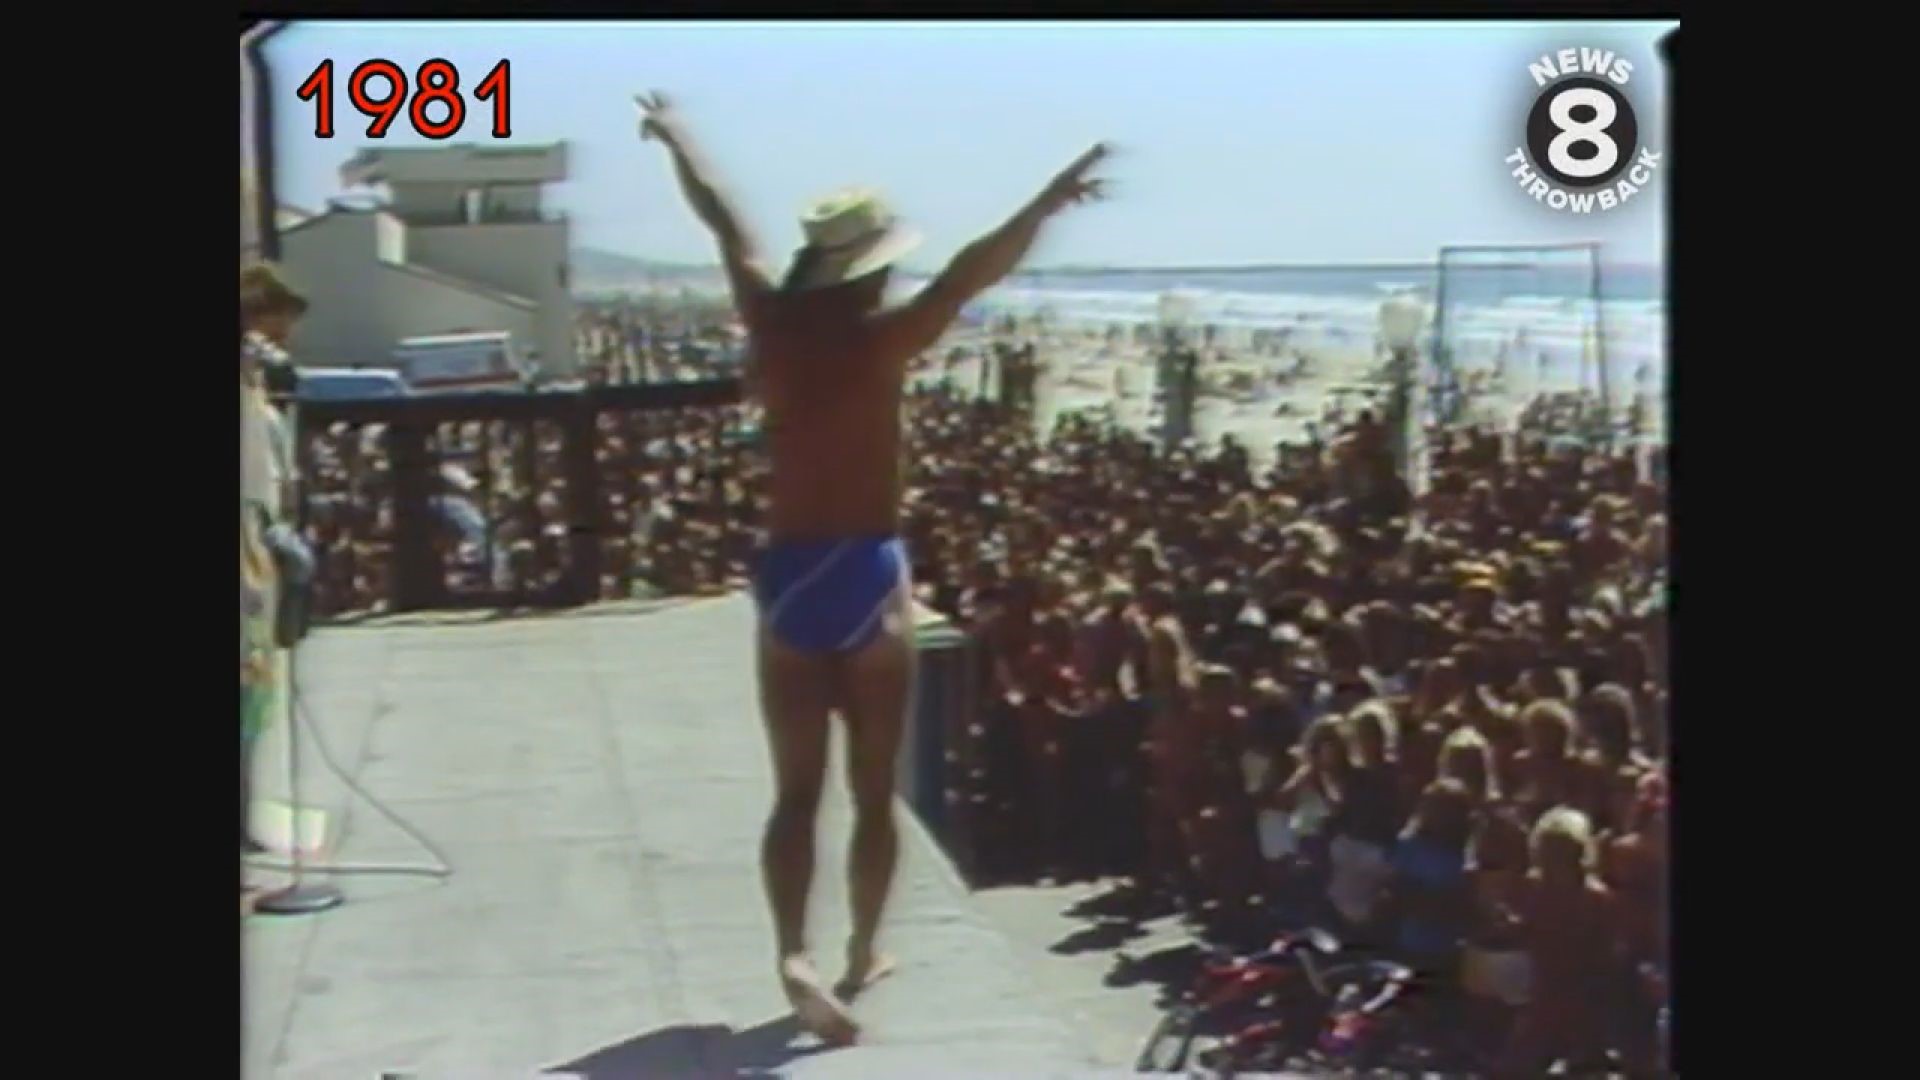 Mr. Mission Beach competition hits San Diego beach in 1981